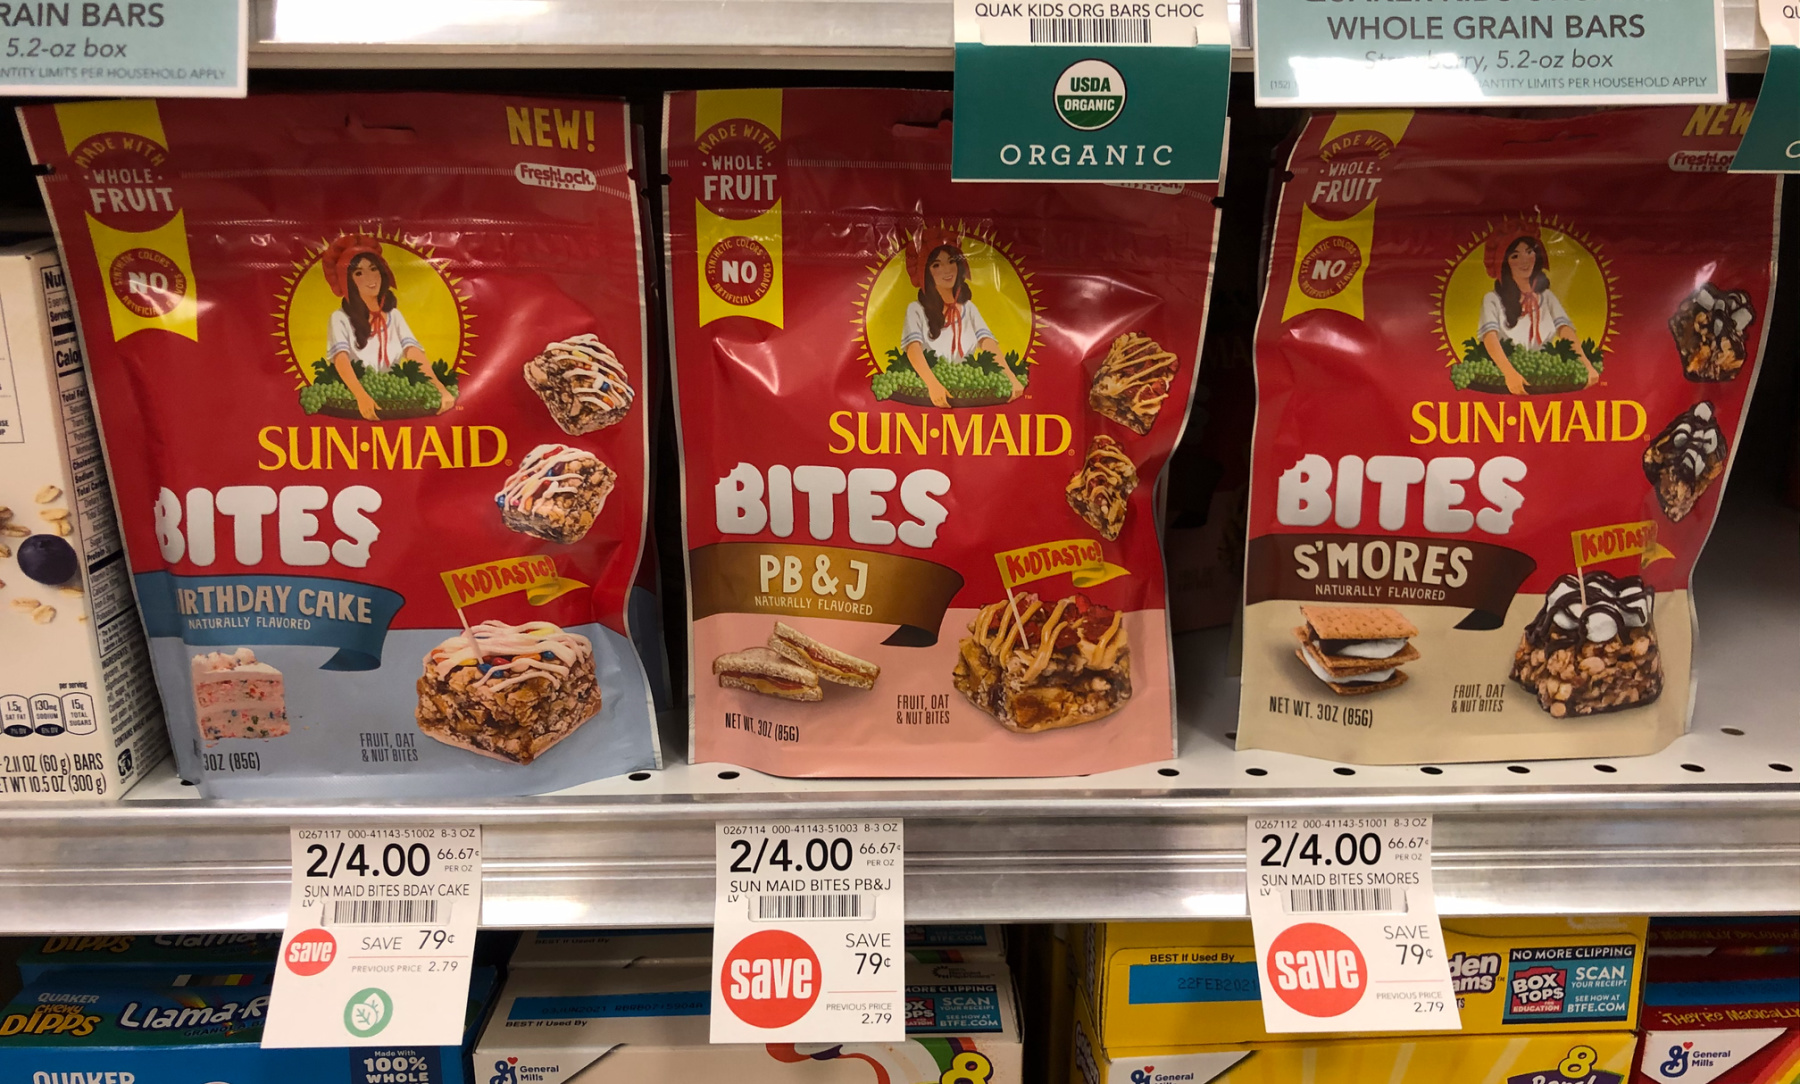 Clip The $2 Digital Coupon And Save On Sun-Maid Bites At Publix on I Heart Publix